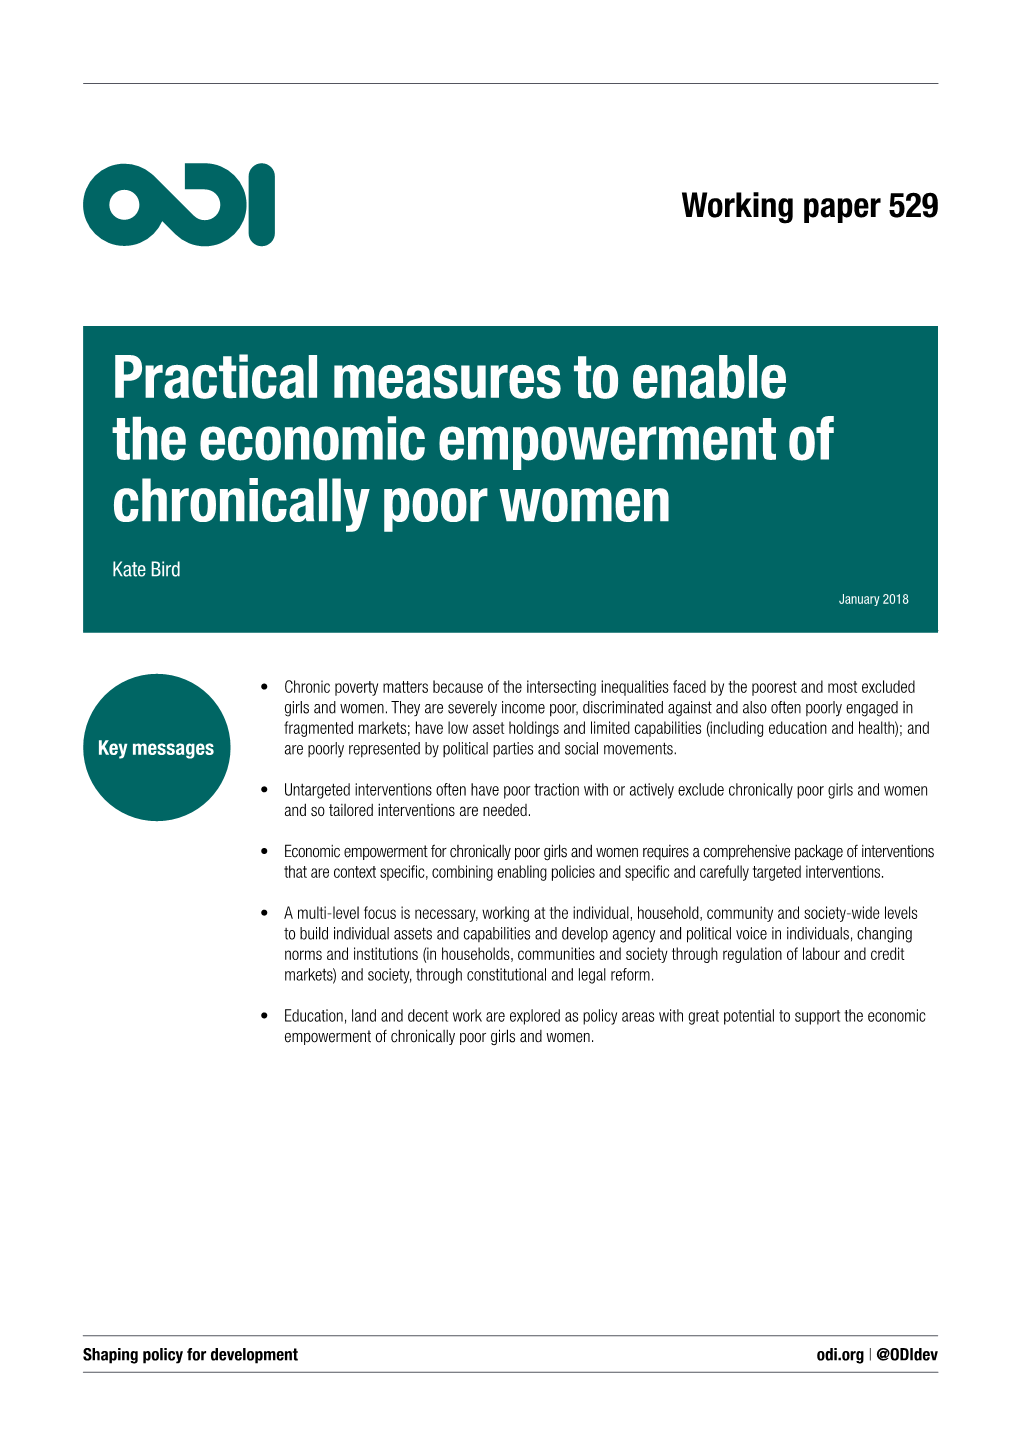 Practical Measures to Enable the Economic Empowerment of Chronically Poor Women